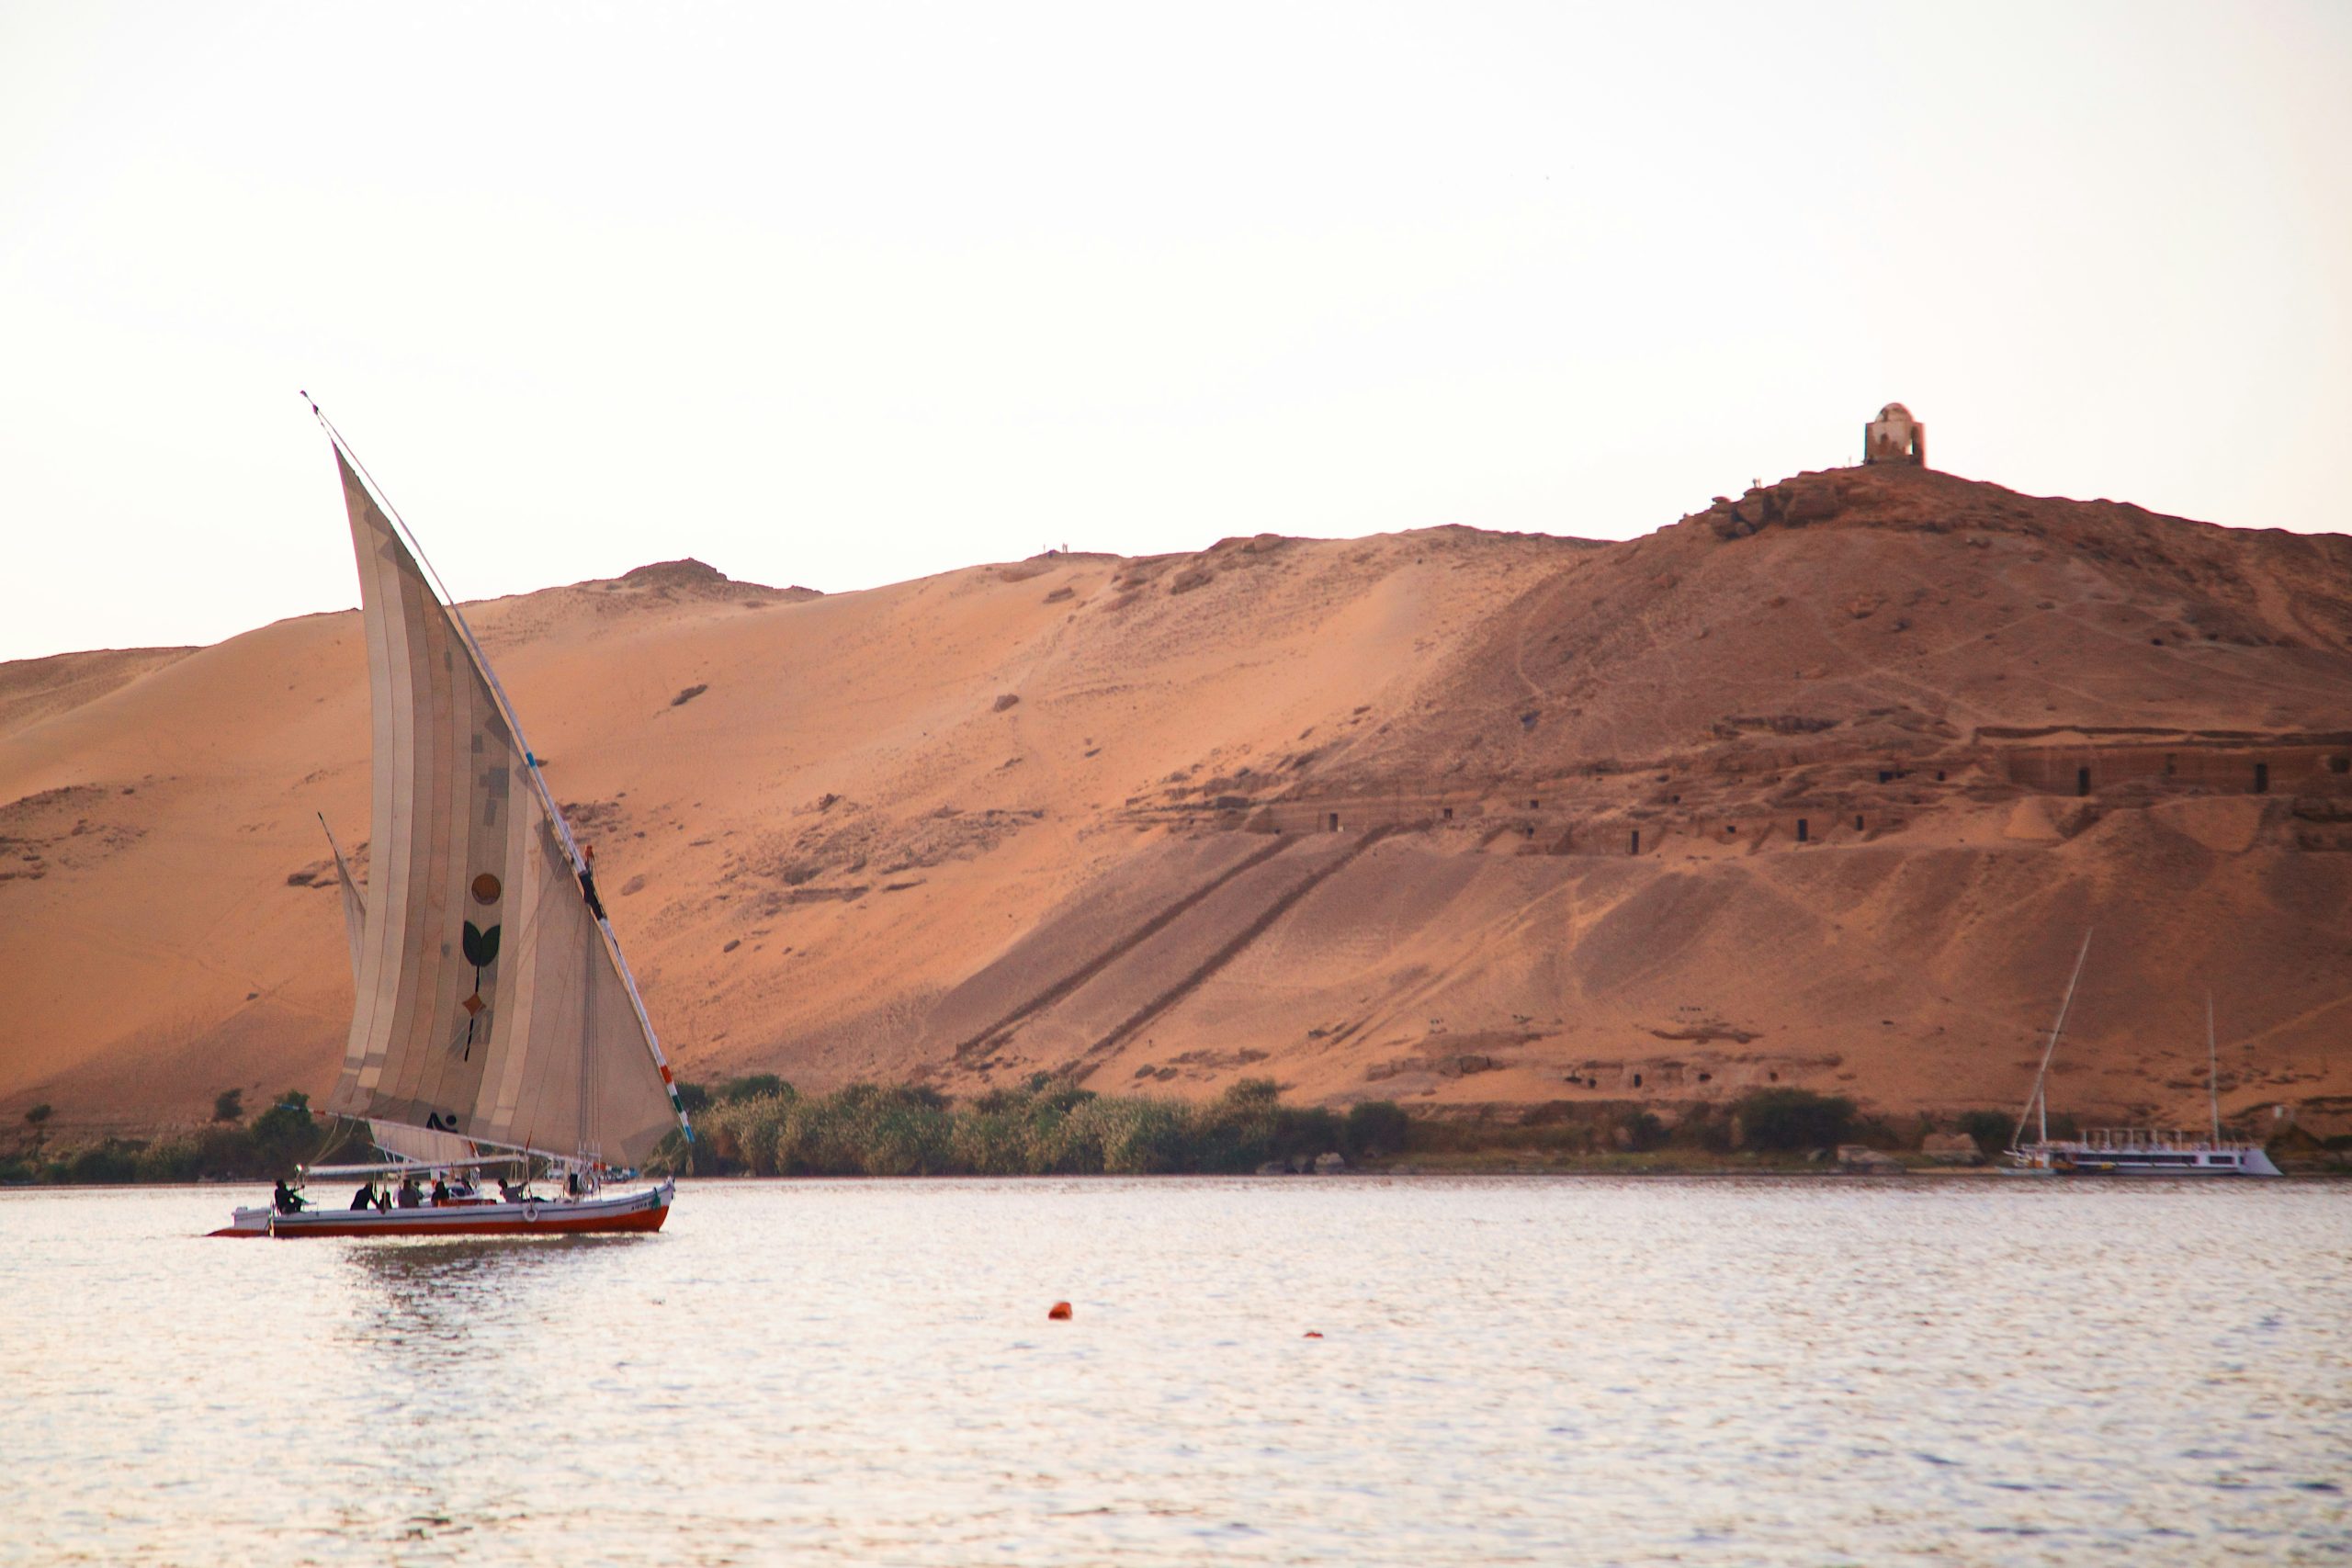 experience the beauty of egypt with a nile cruise. discover ancient wonders, picturesque landscapes, and vibrant culture along the legendary river.